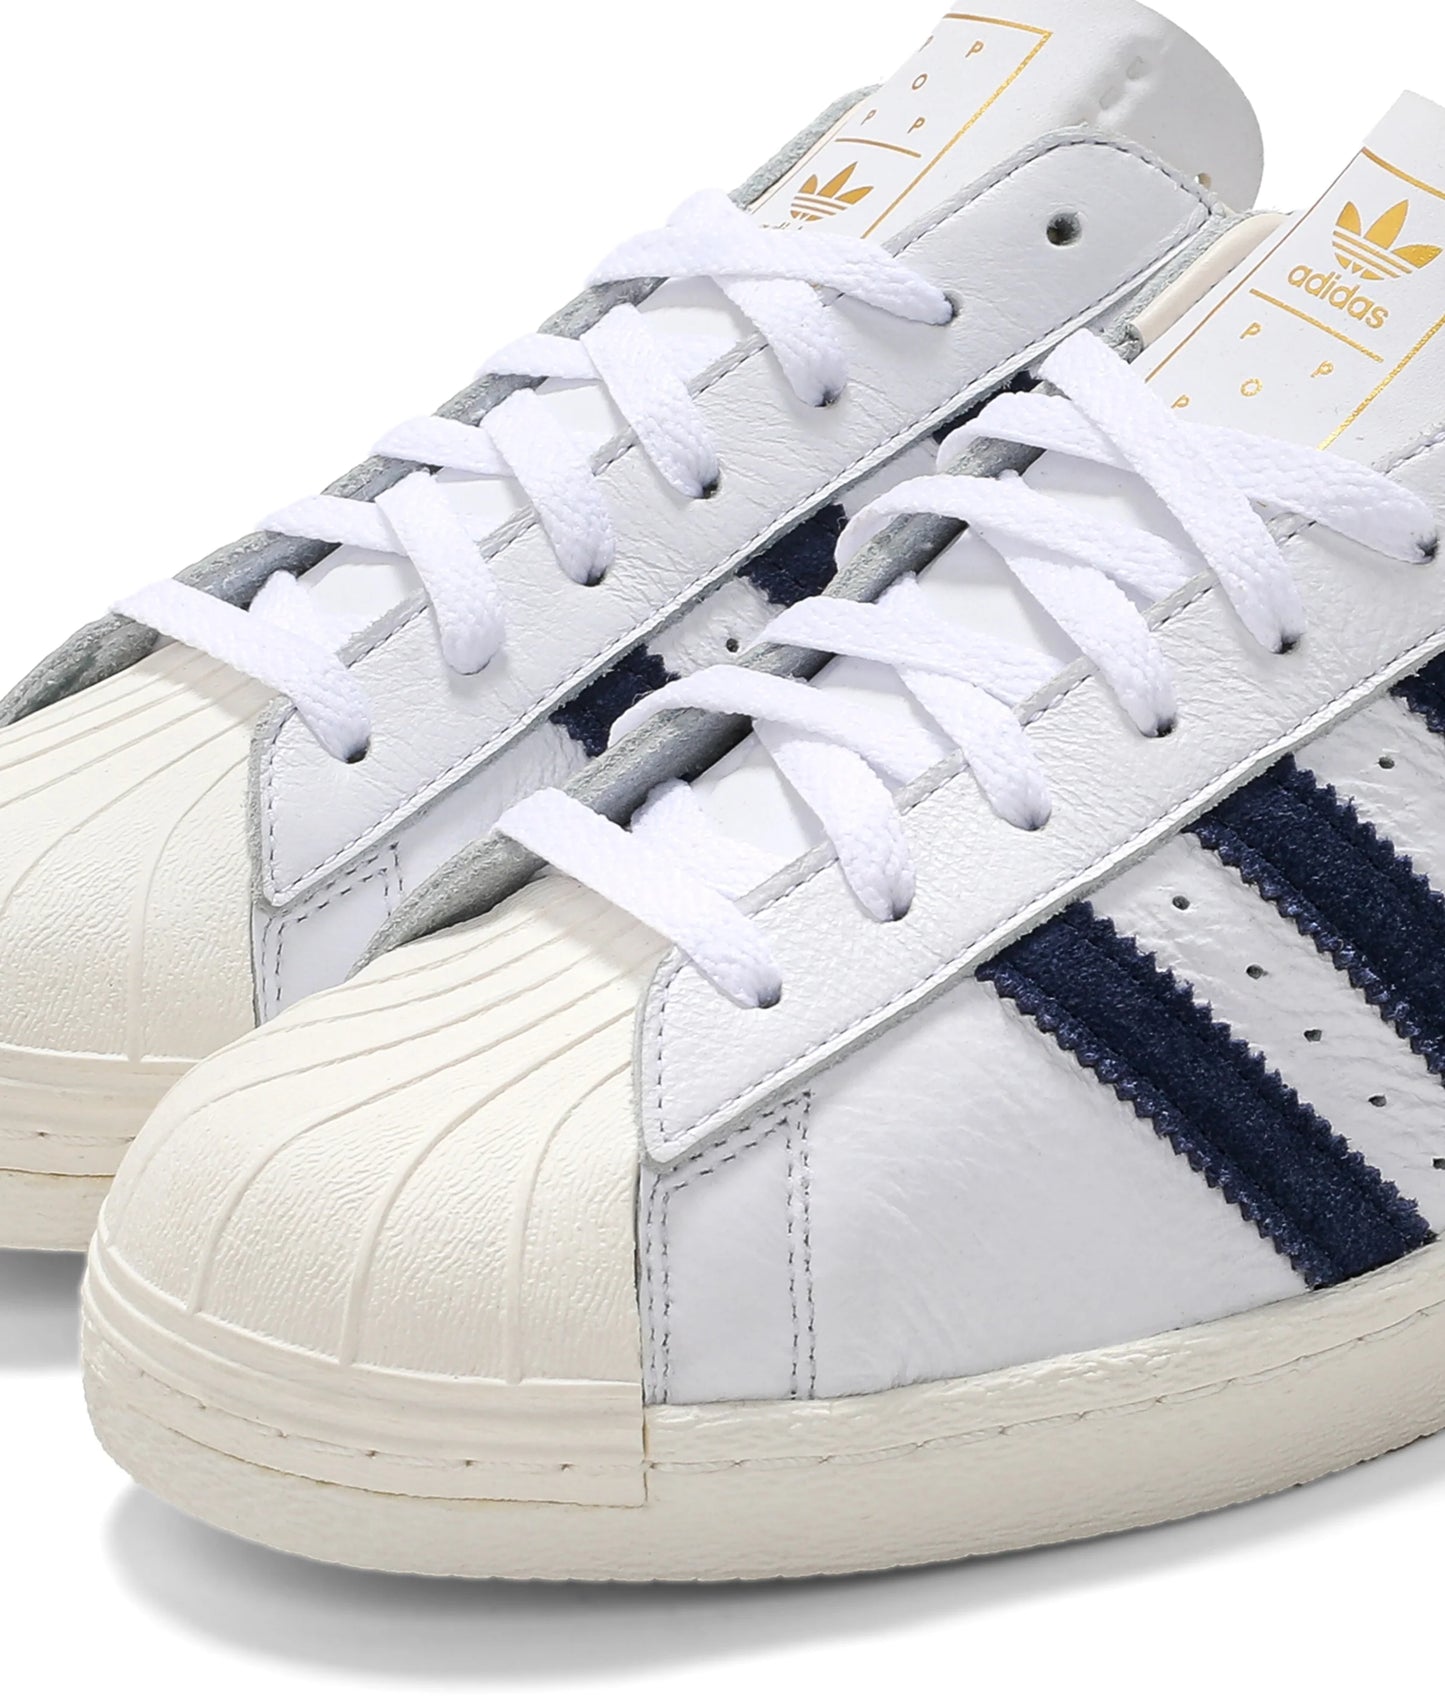 adidas X Pop Trading Co Supe Ftwwht/Conavy/Cwhite